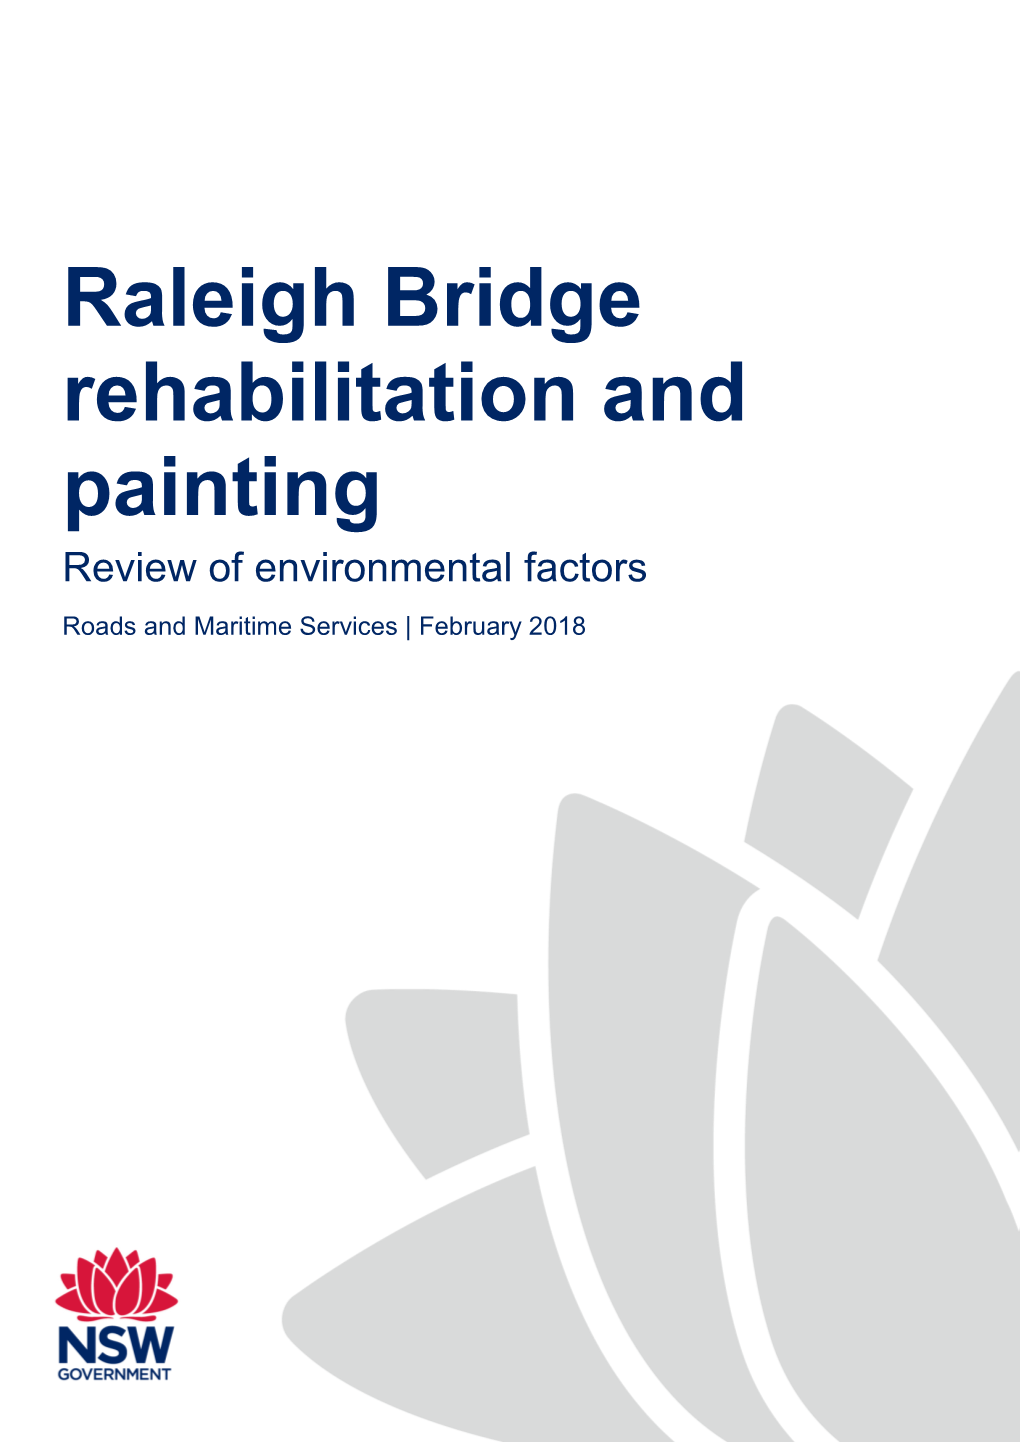 Raleigh Bridge Rehabilitation and Painting Review of Environmental Factors Roads and Maritime Services | February 2018